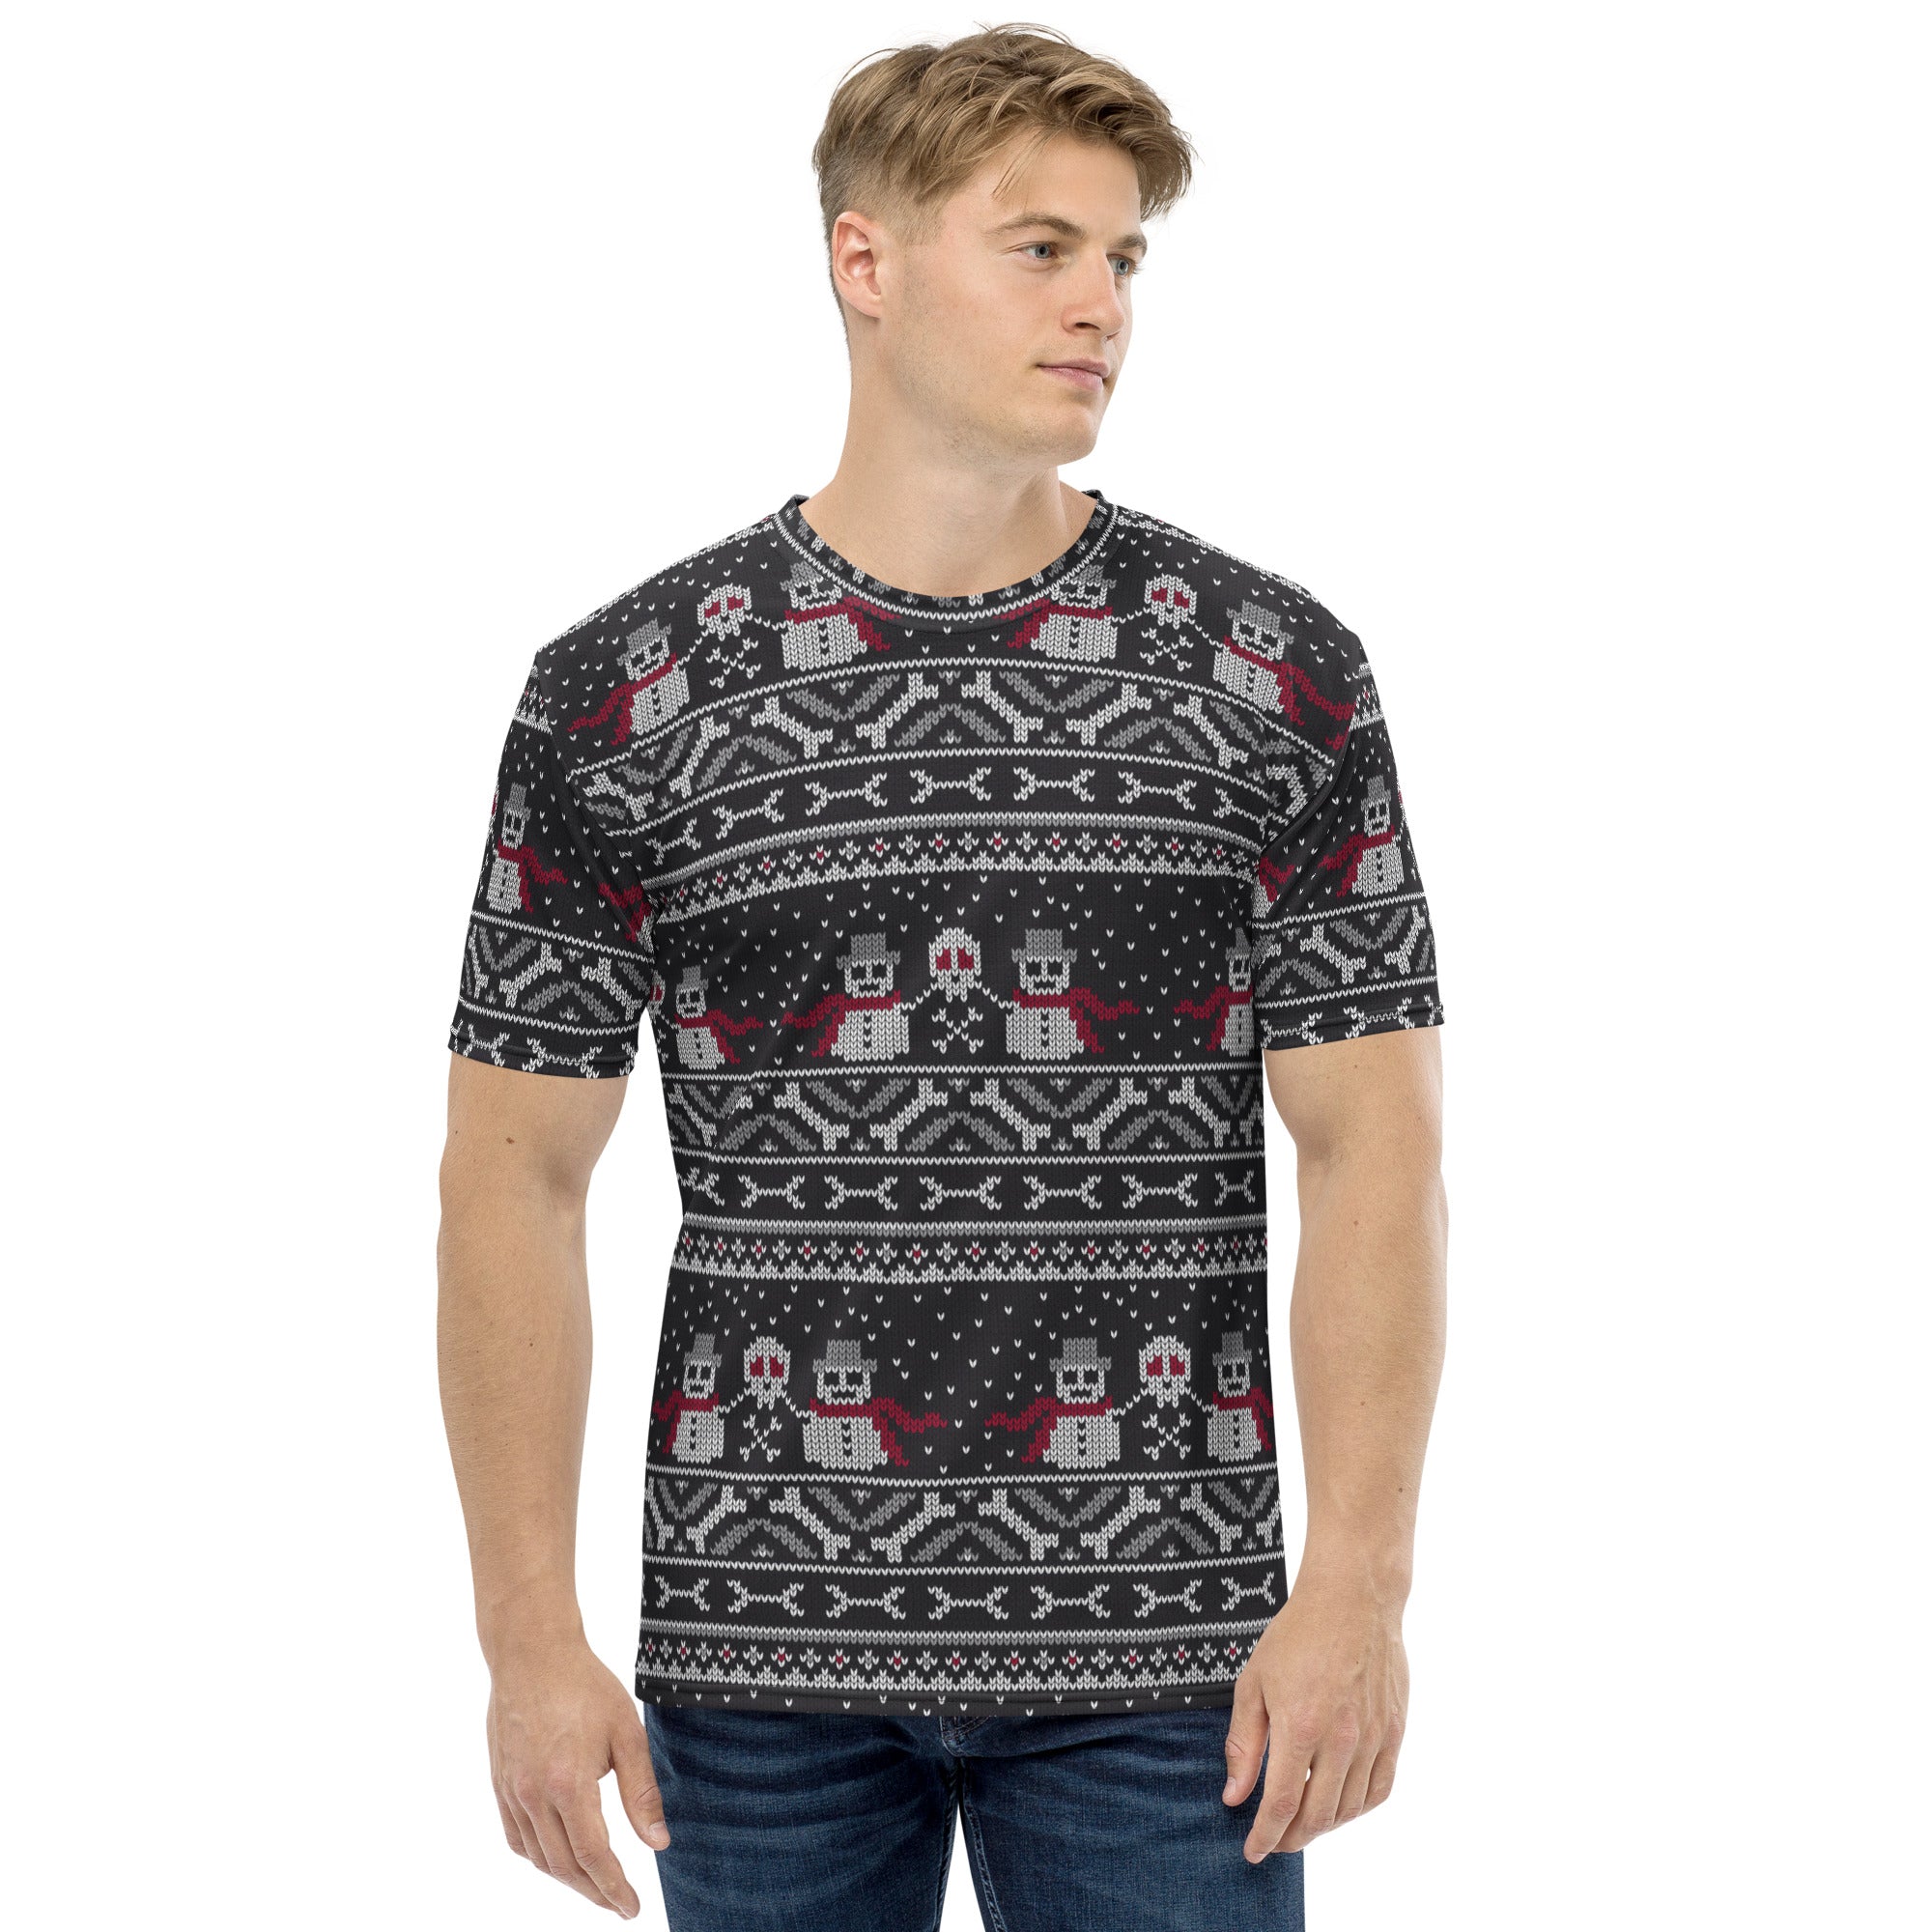 Vintage Goth Knitted Print Men's T-shirt